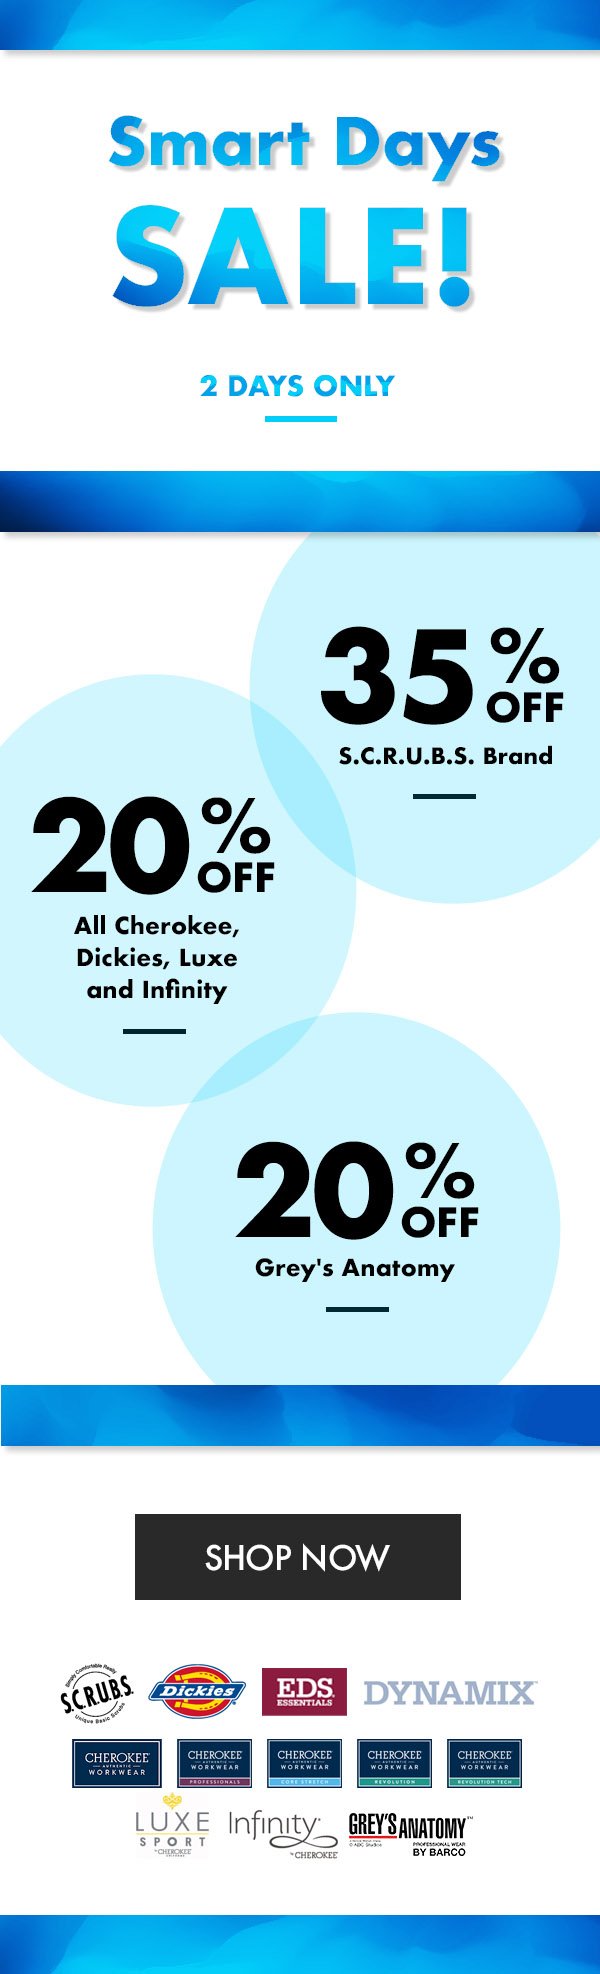 Save up to 60% on S.C.R.U.B.S Green Solids & Prints!